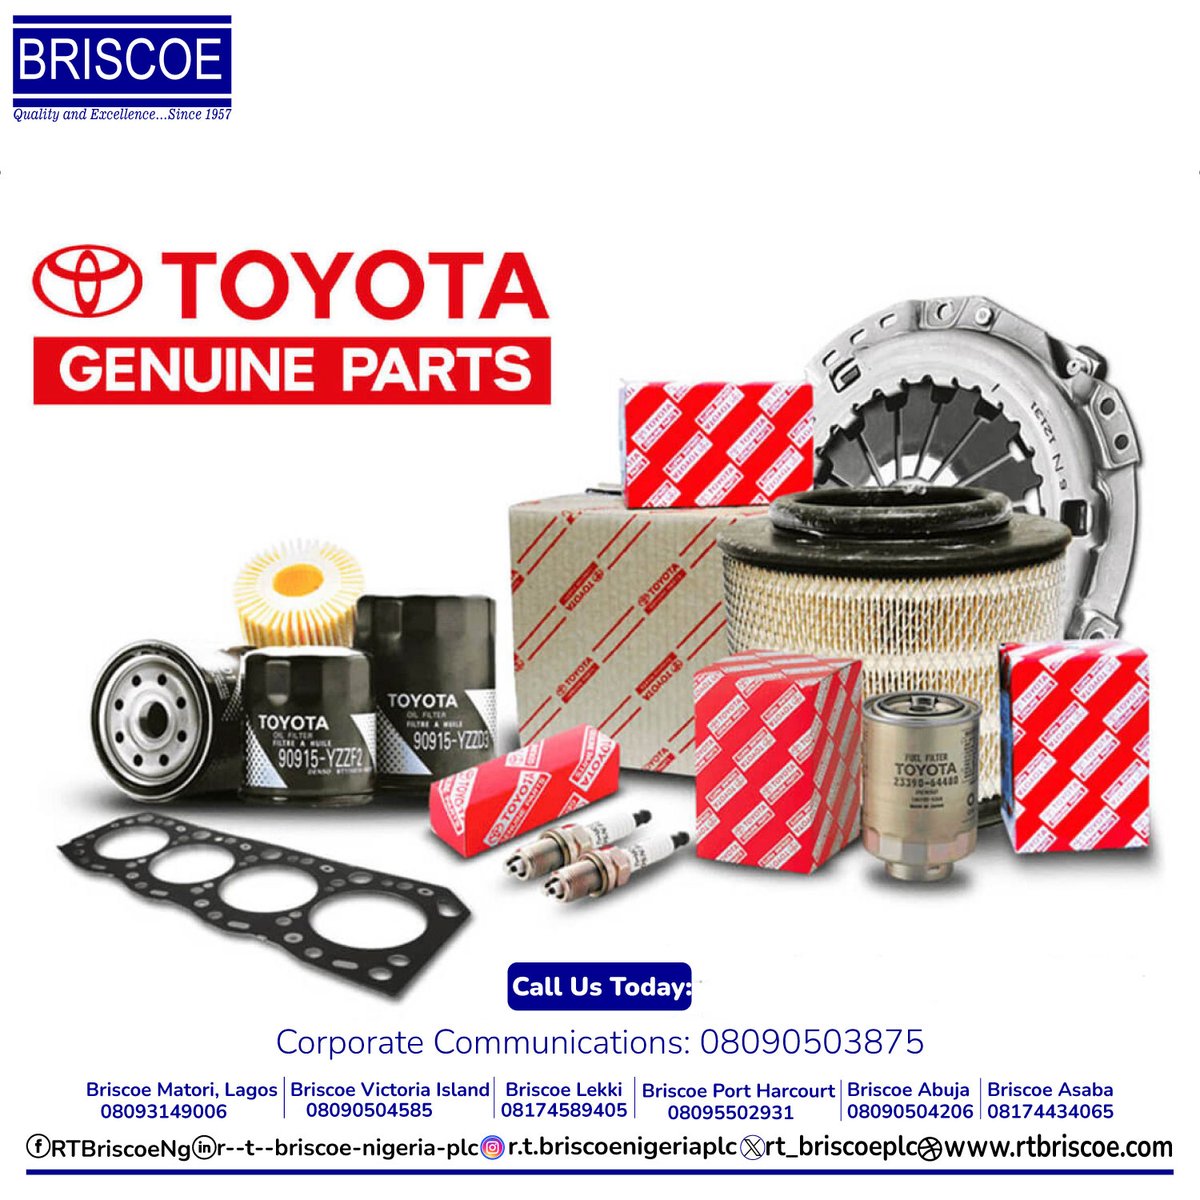 Briscoe Motors' genuine Toyota parts ensure optimal performance, durability, and safety for your vehicle. Trust in Briscoe Motors for quality you can rely on.  #briscoemotors #rtbriscoenigeriaplc #Toyota #parts #spareparts #wednesday #motors